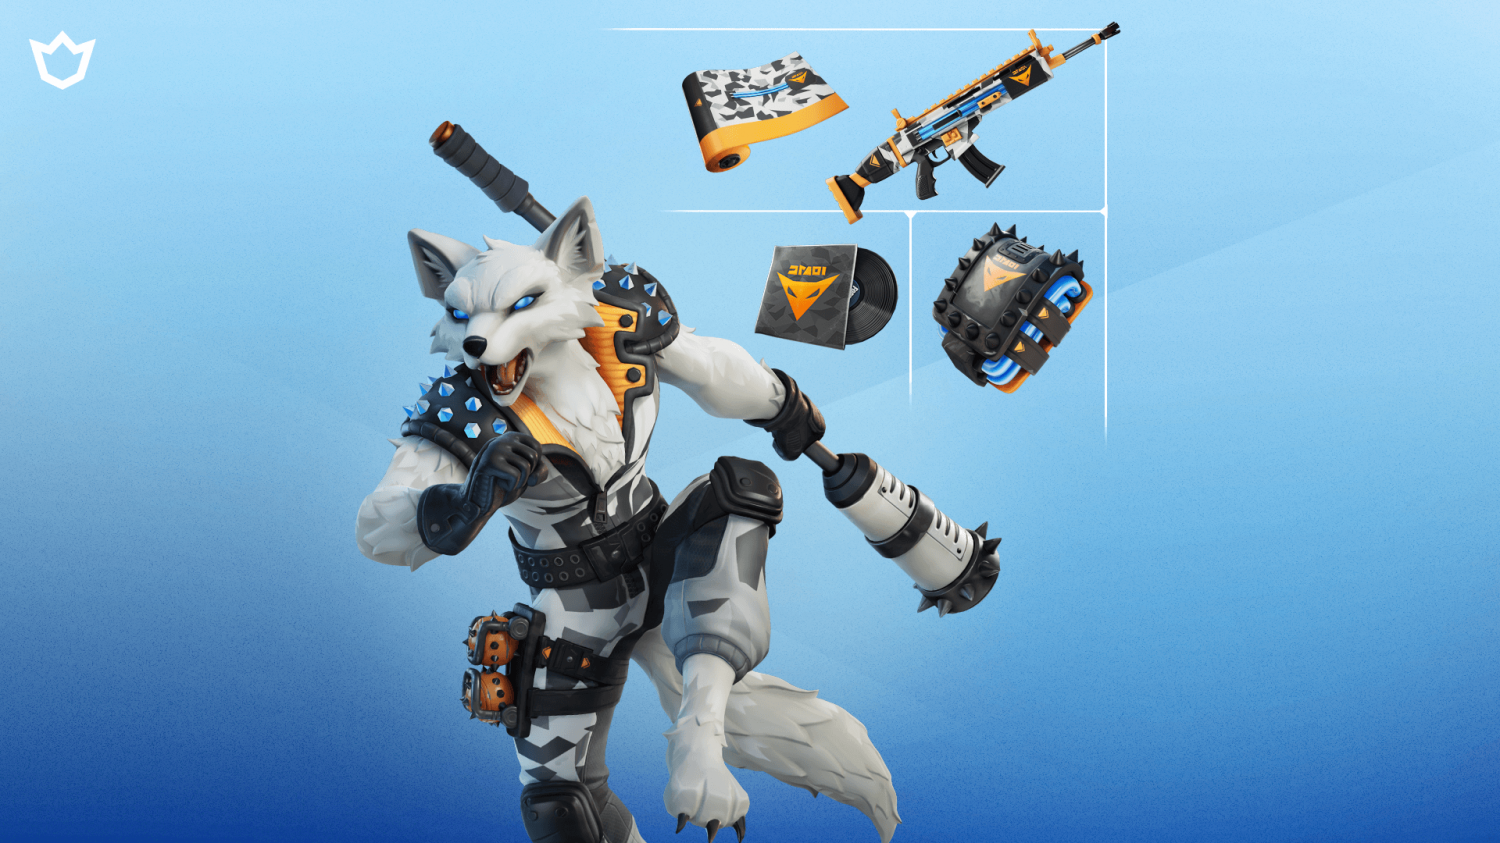 Patch Notes for Fortnite v25.11 - Explosive Repeater Rifle Added